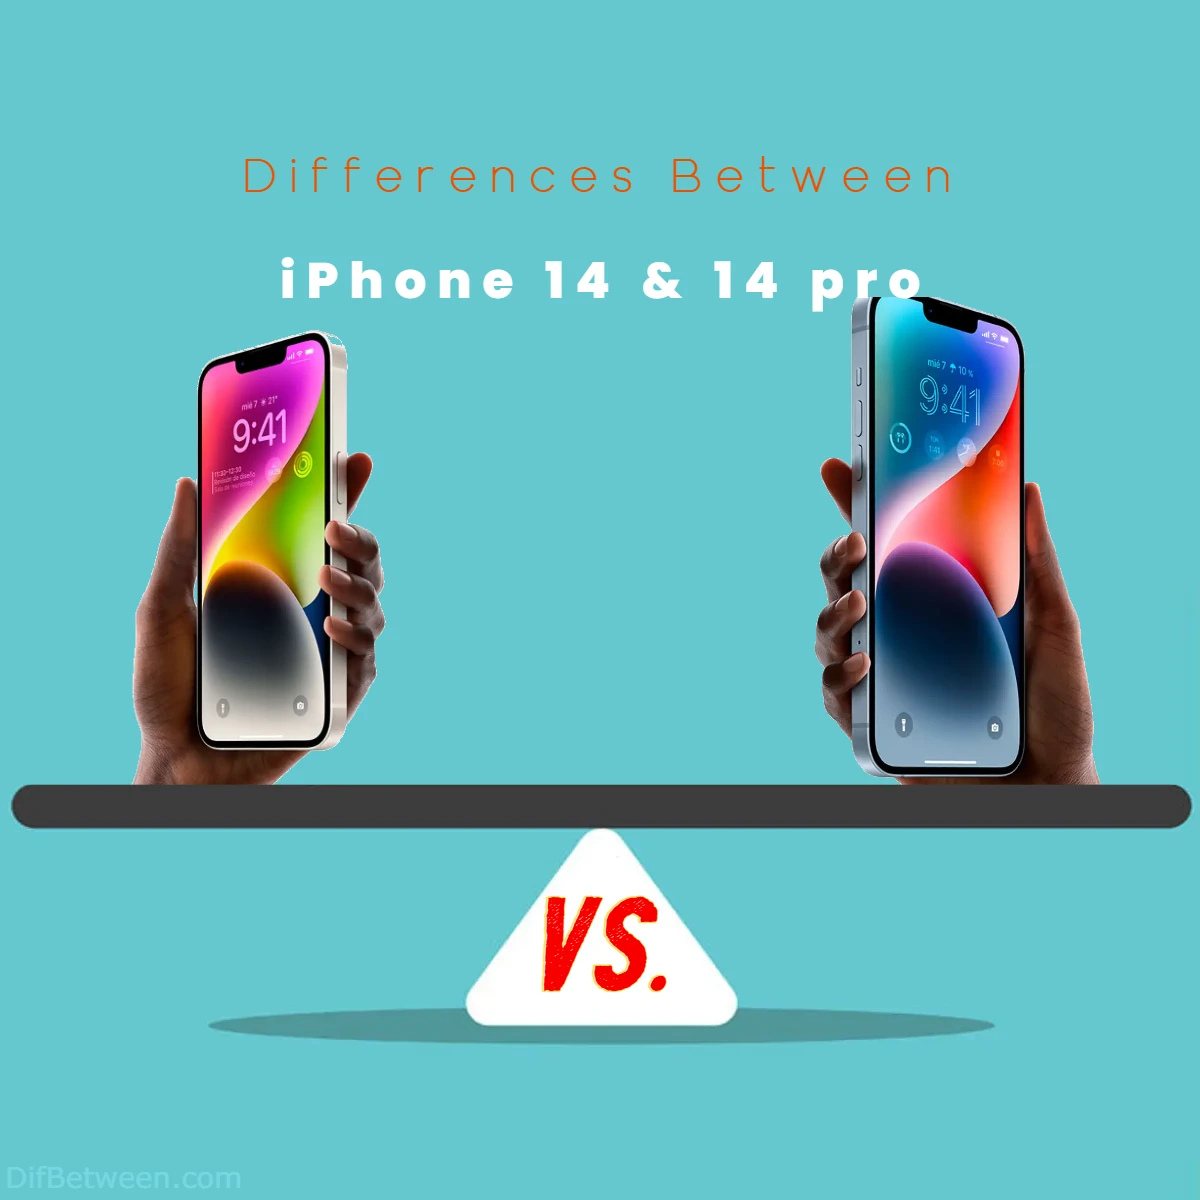 Differences Between iPhone 14 pro and iPhone 14